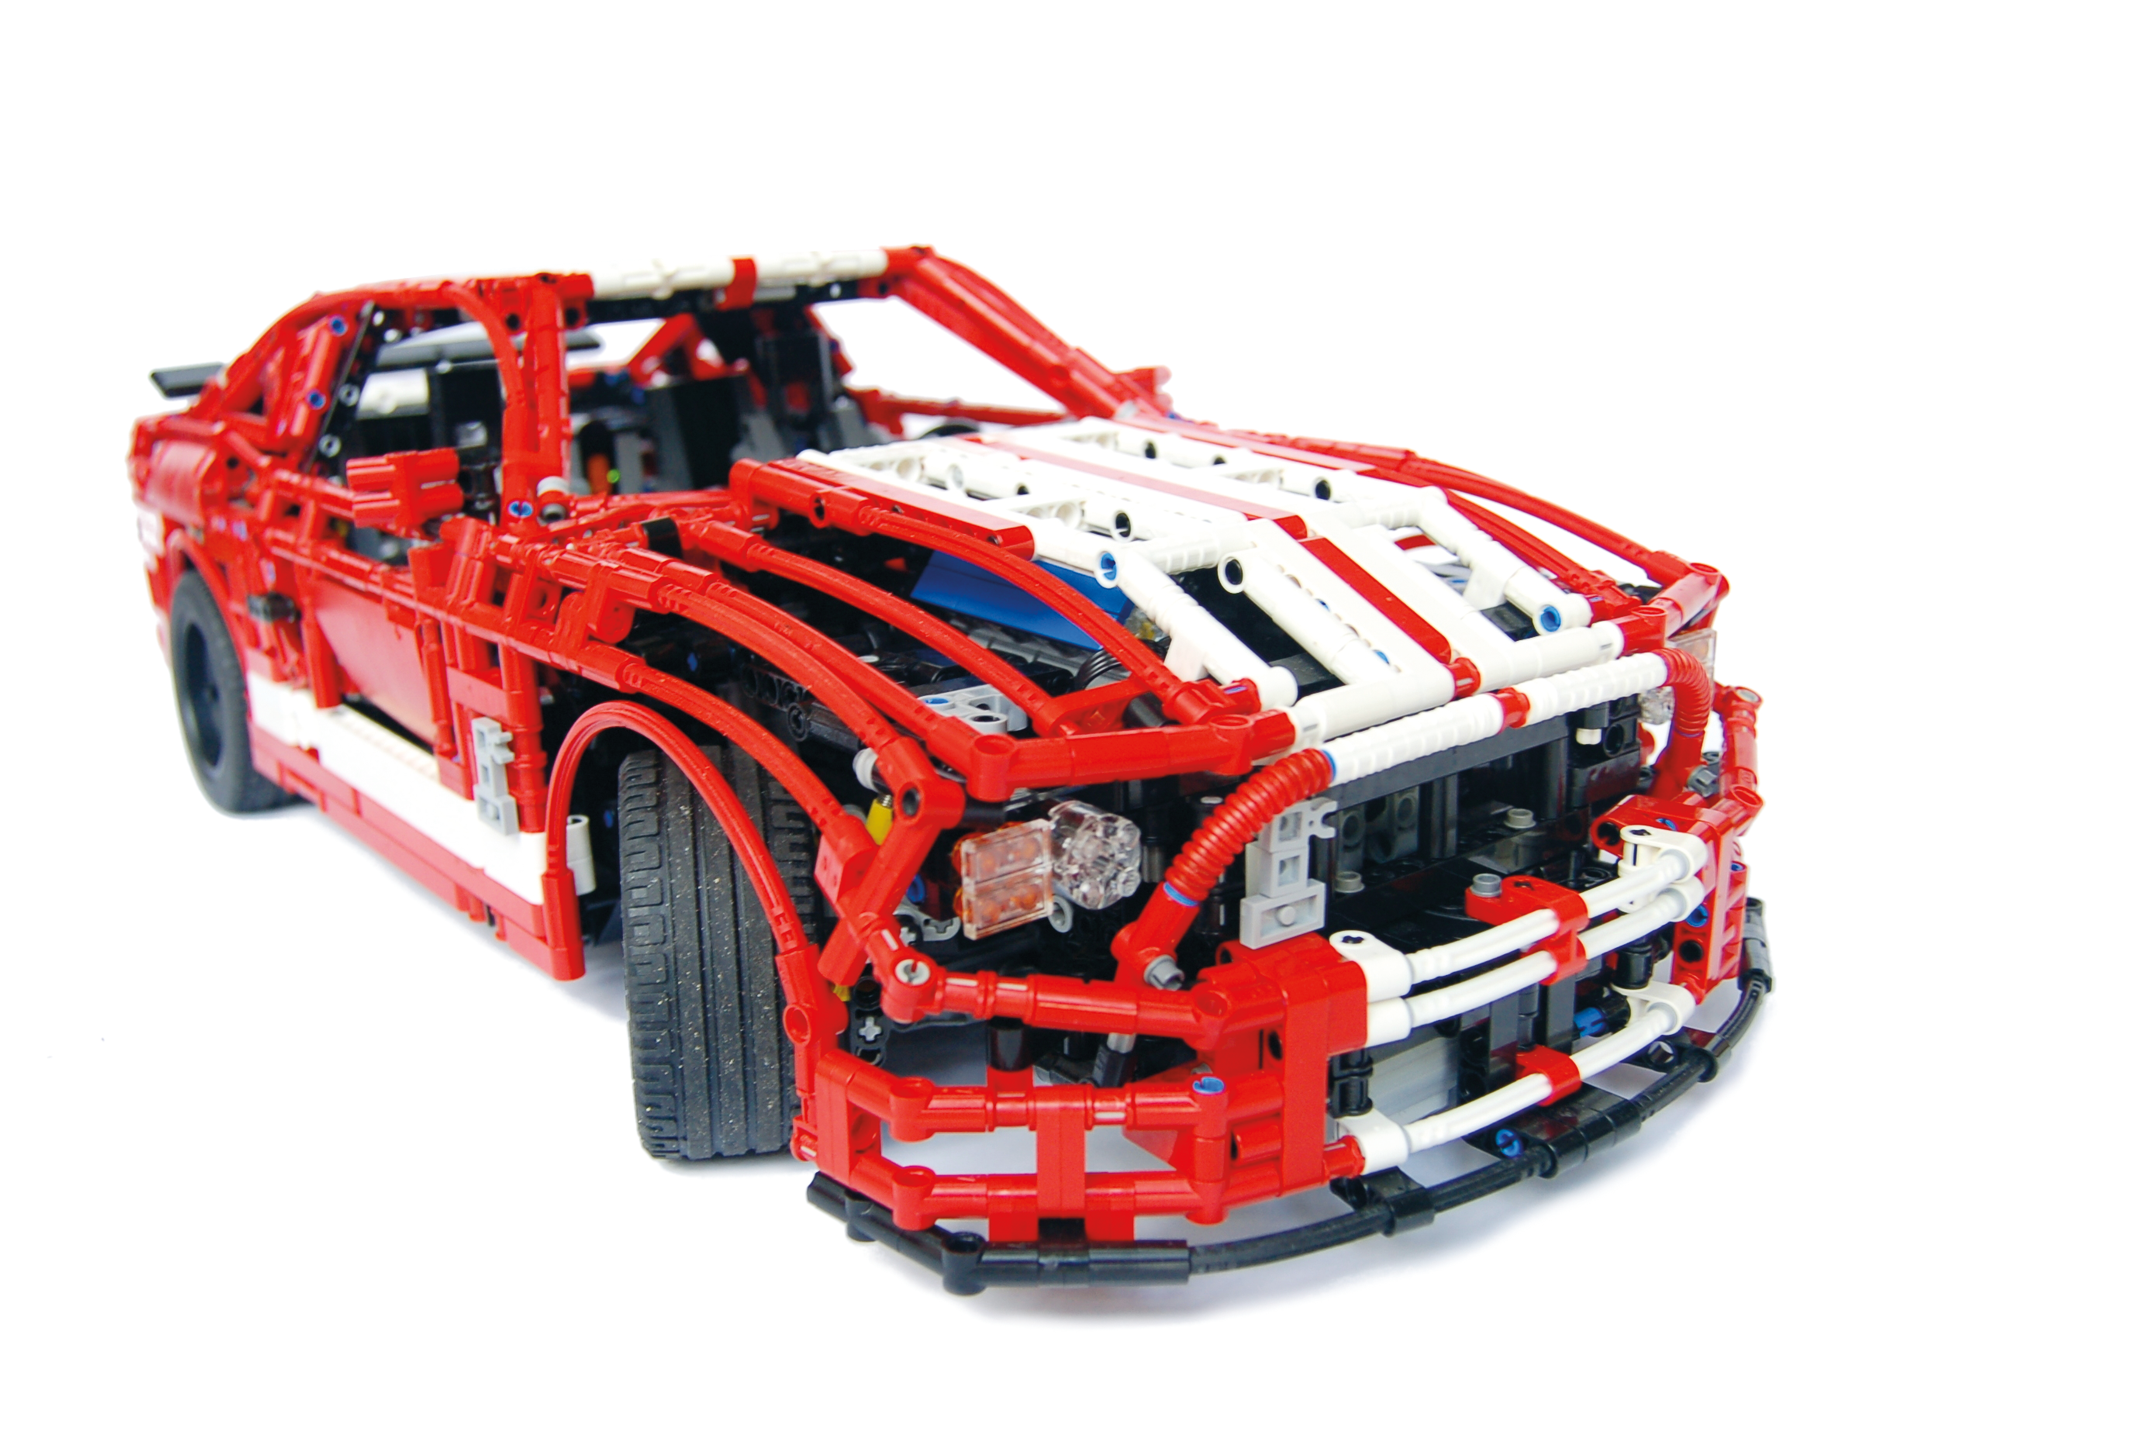 Some Of The Best LEGO Uses More Than Just Bricks